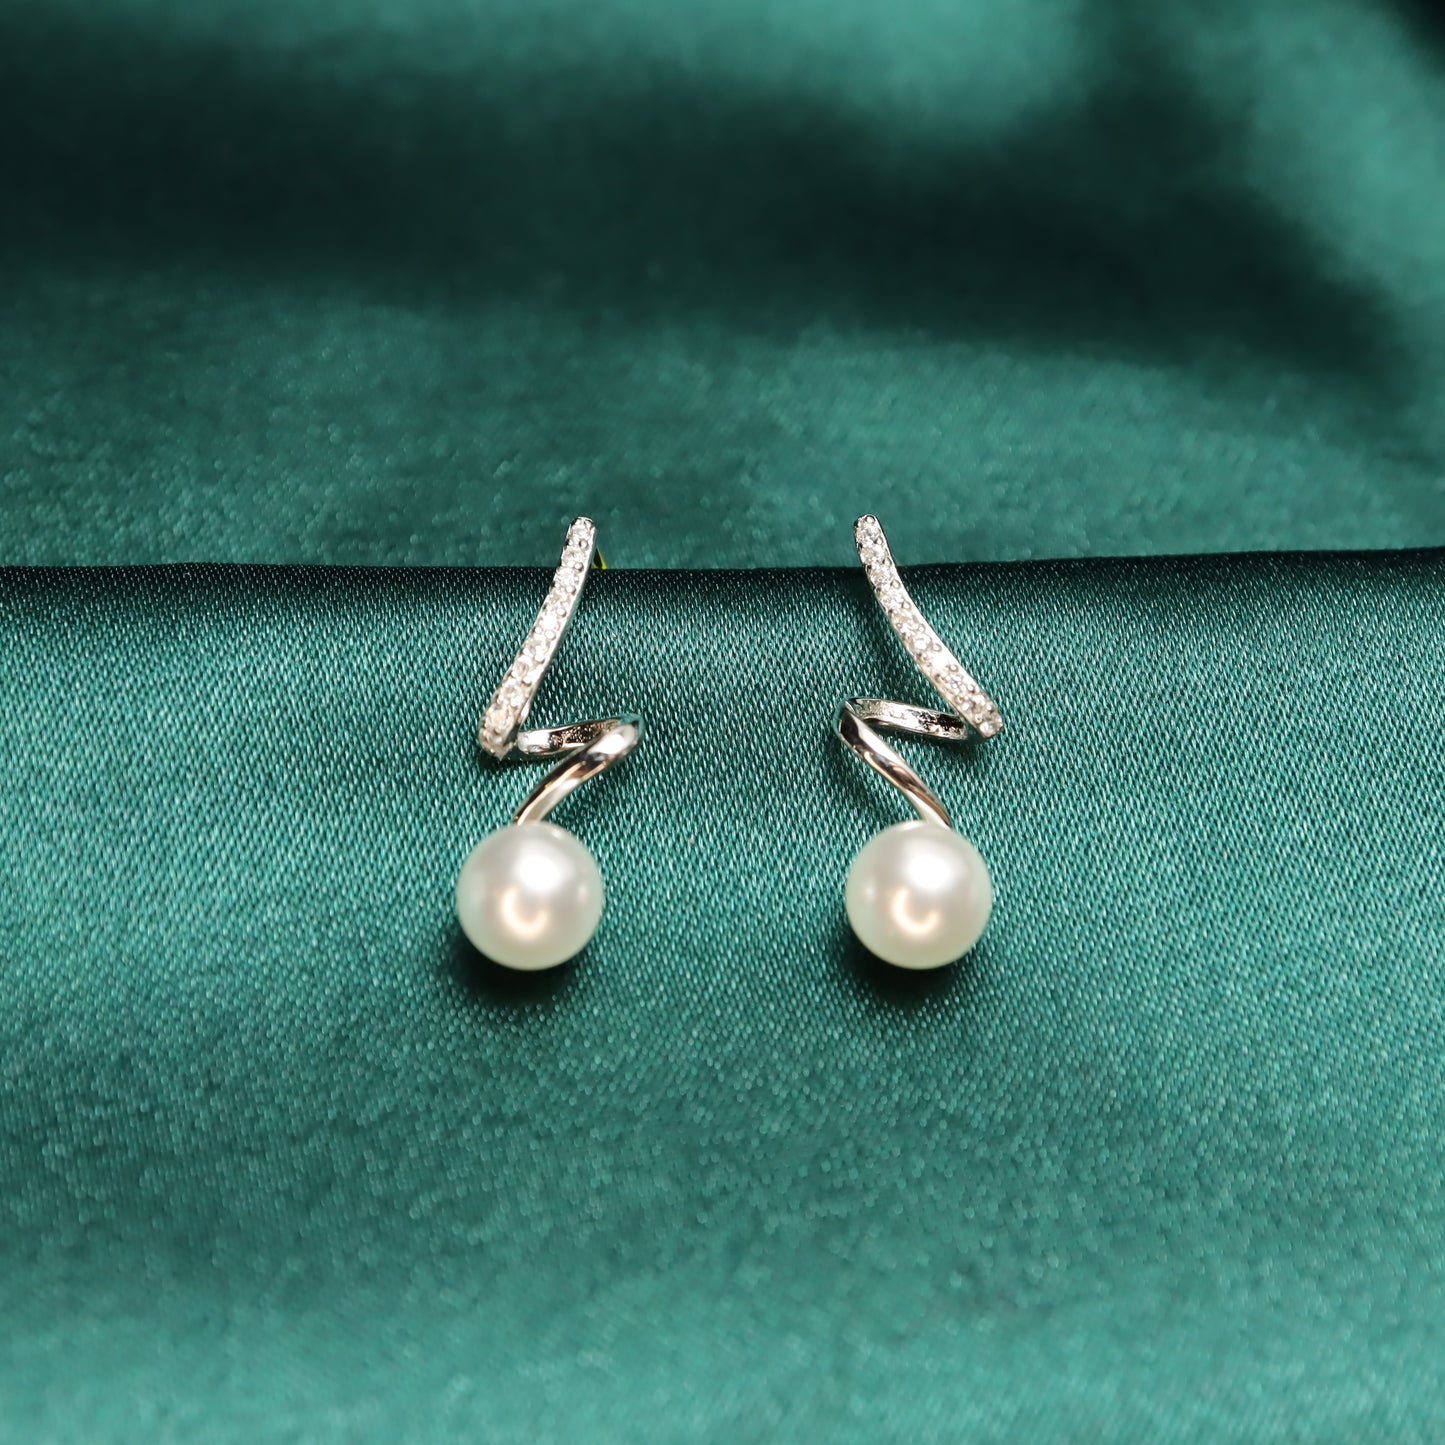 Golden Faith - S925 Sterling Silver & Pearl with Zircon Stud Earrings (Color: Silver)